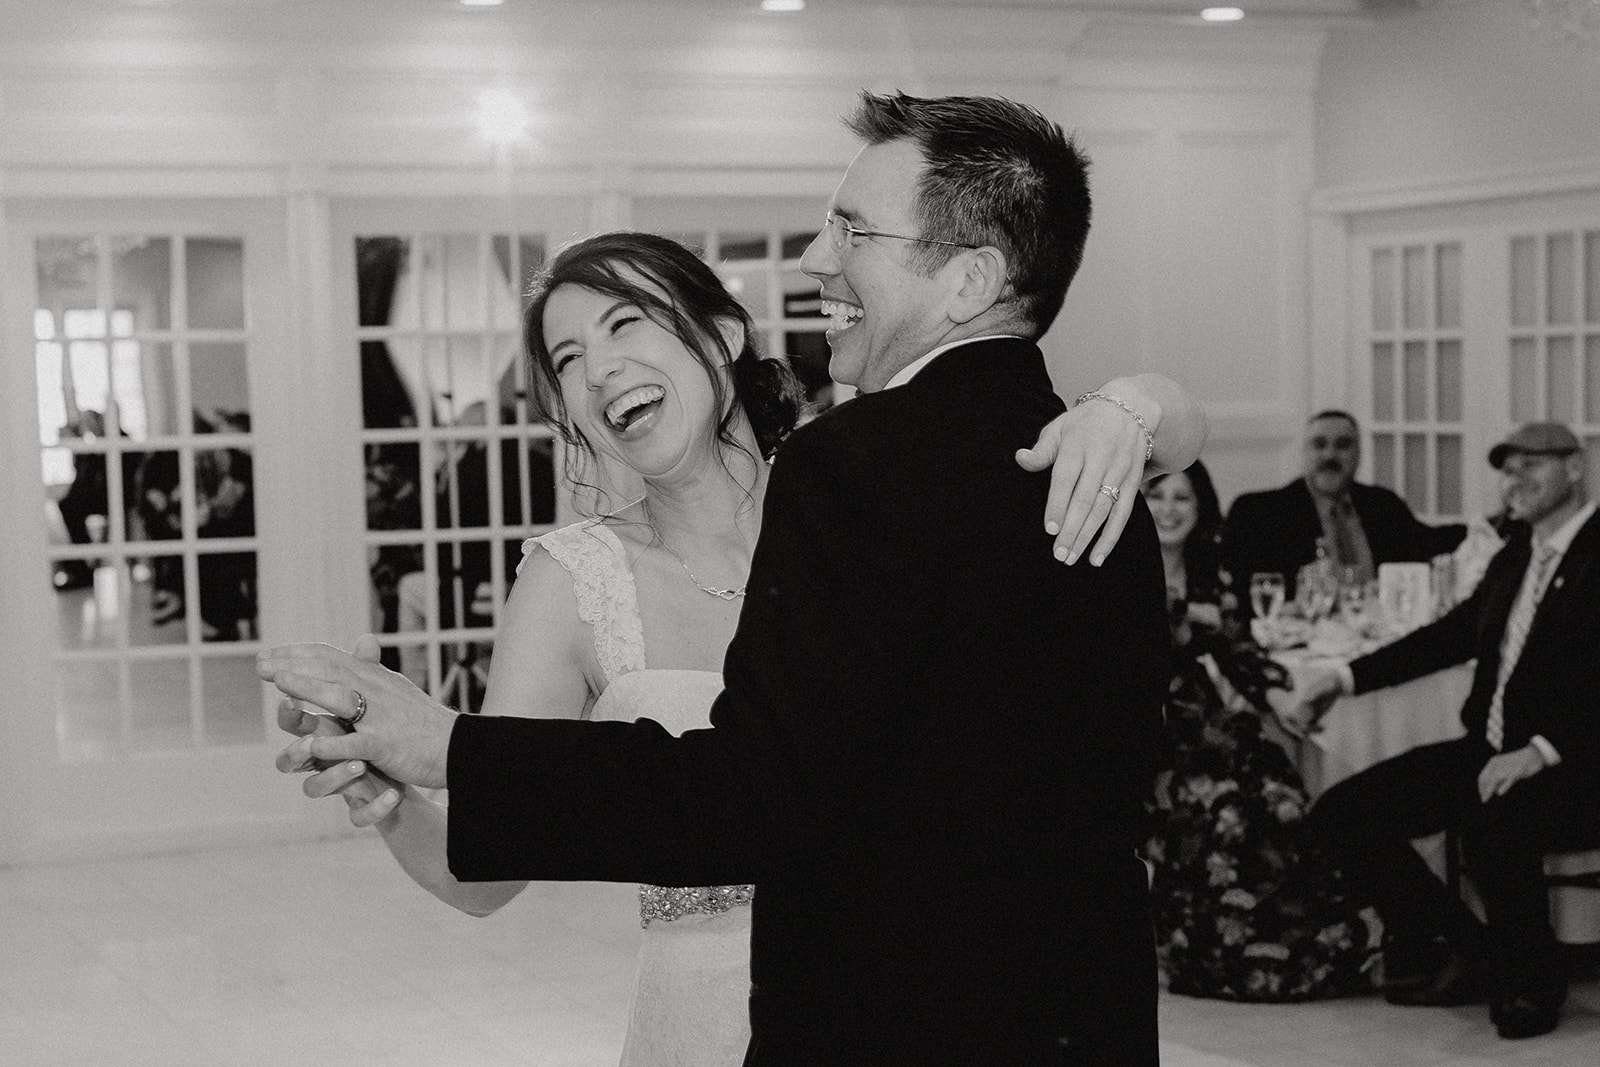 black and white photograph of the bride & groom dancing
new haven wedding photographer